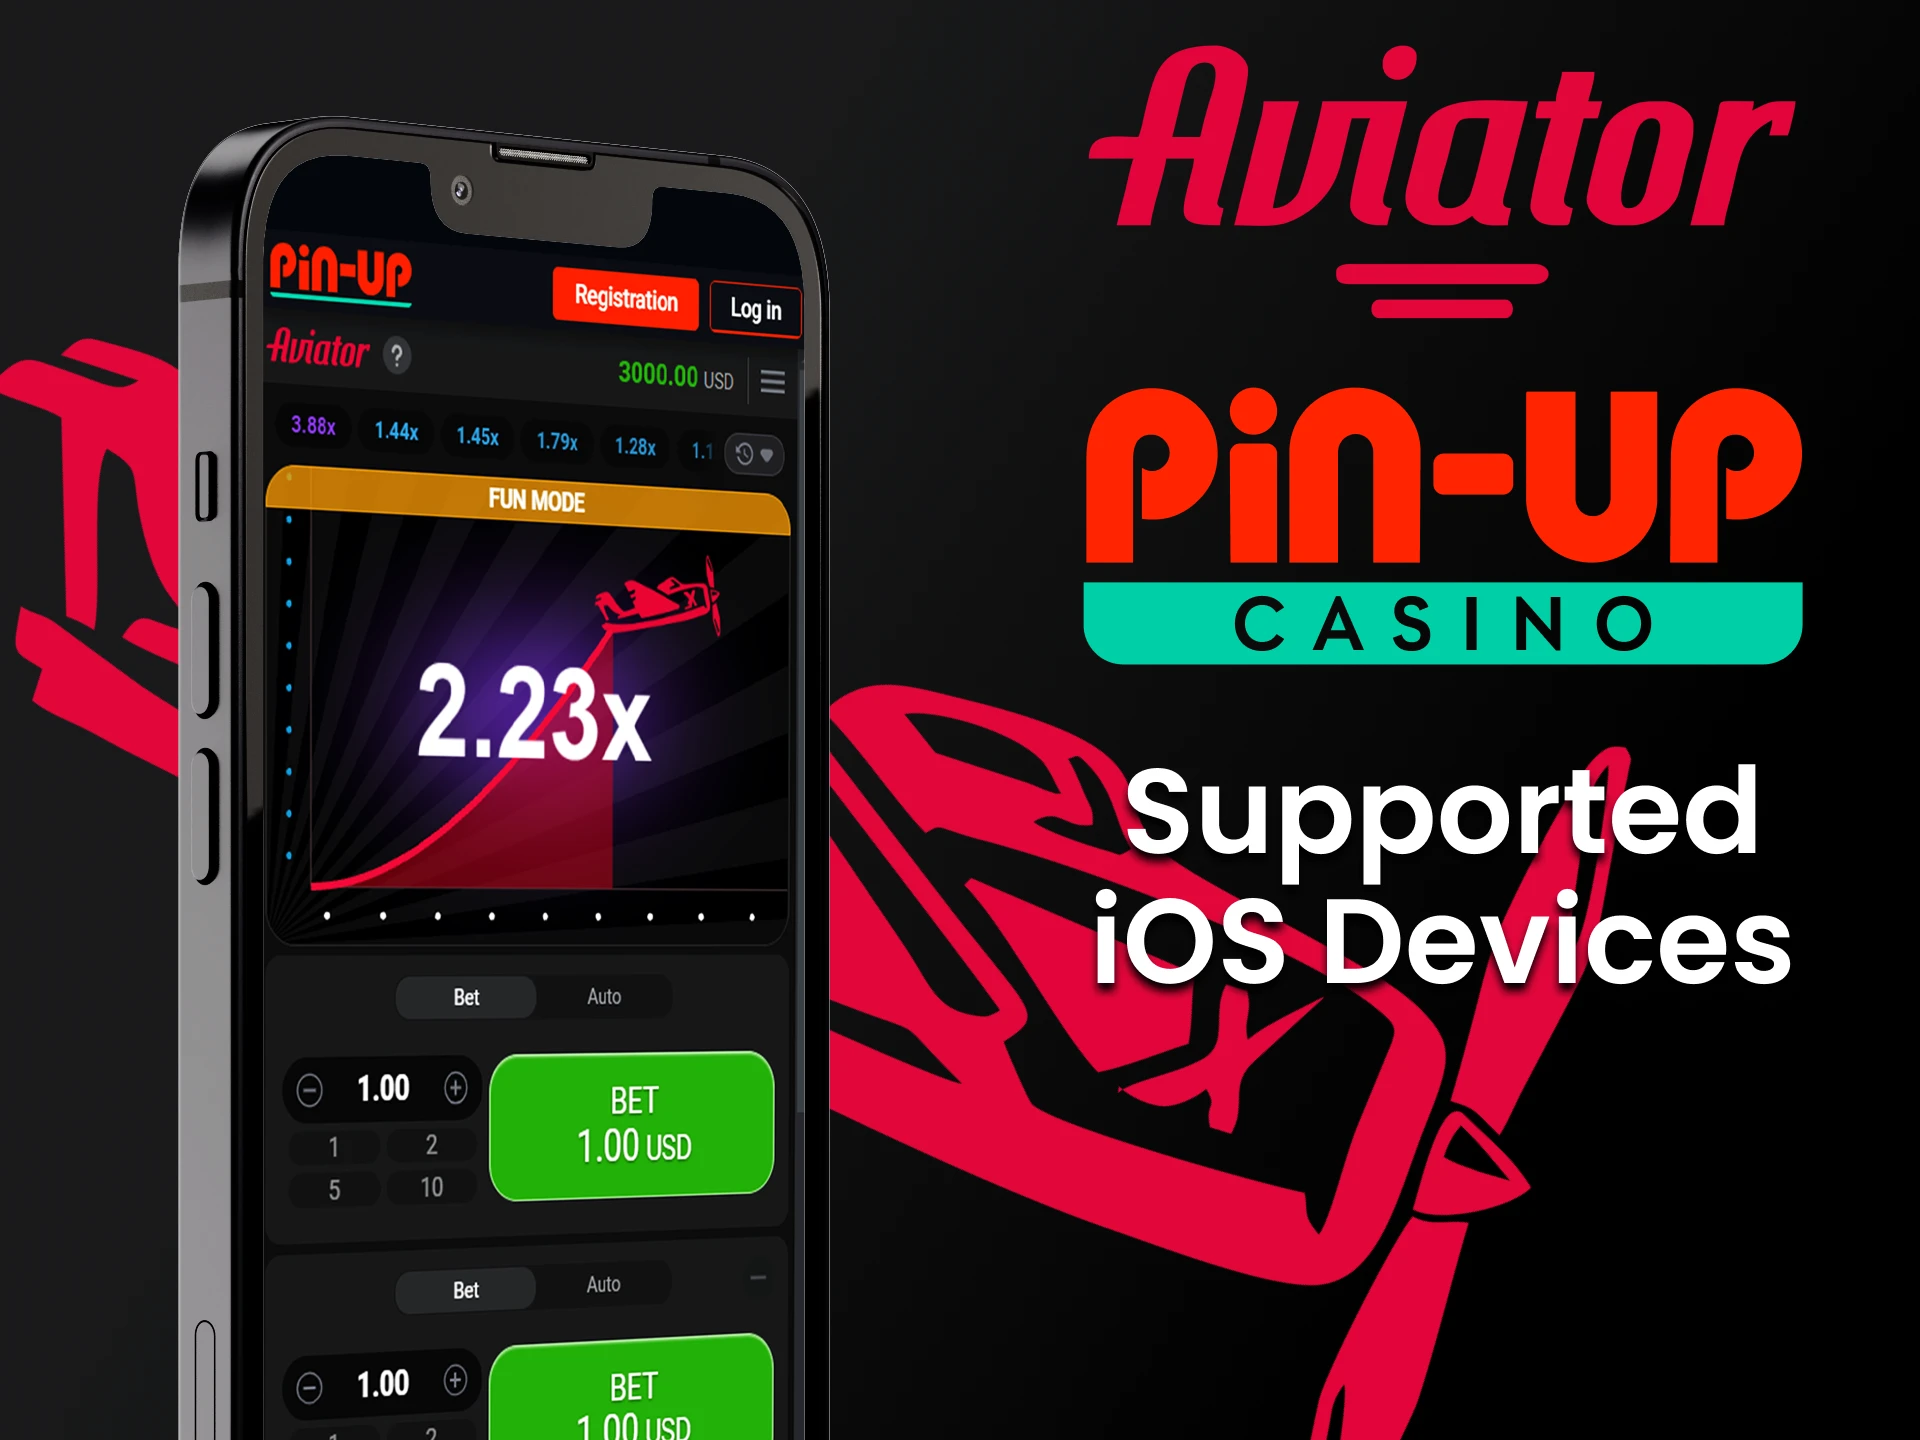 Play Aviator by Pin Up on iOS devices.